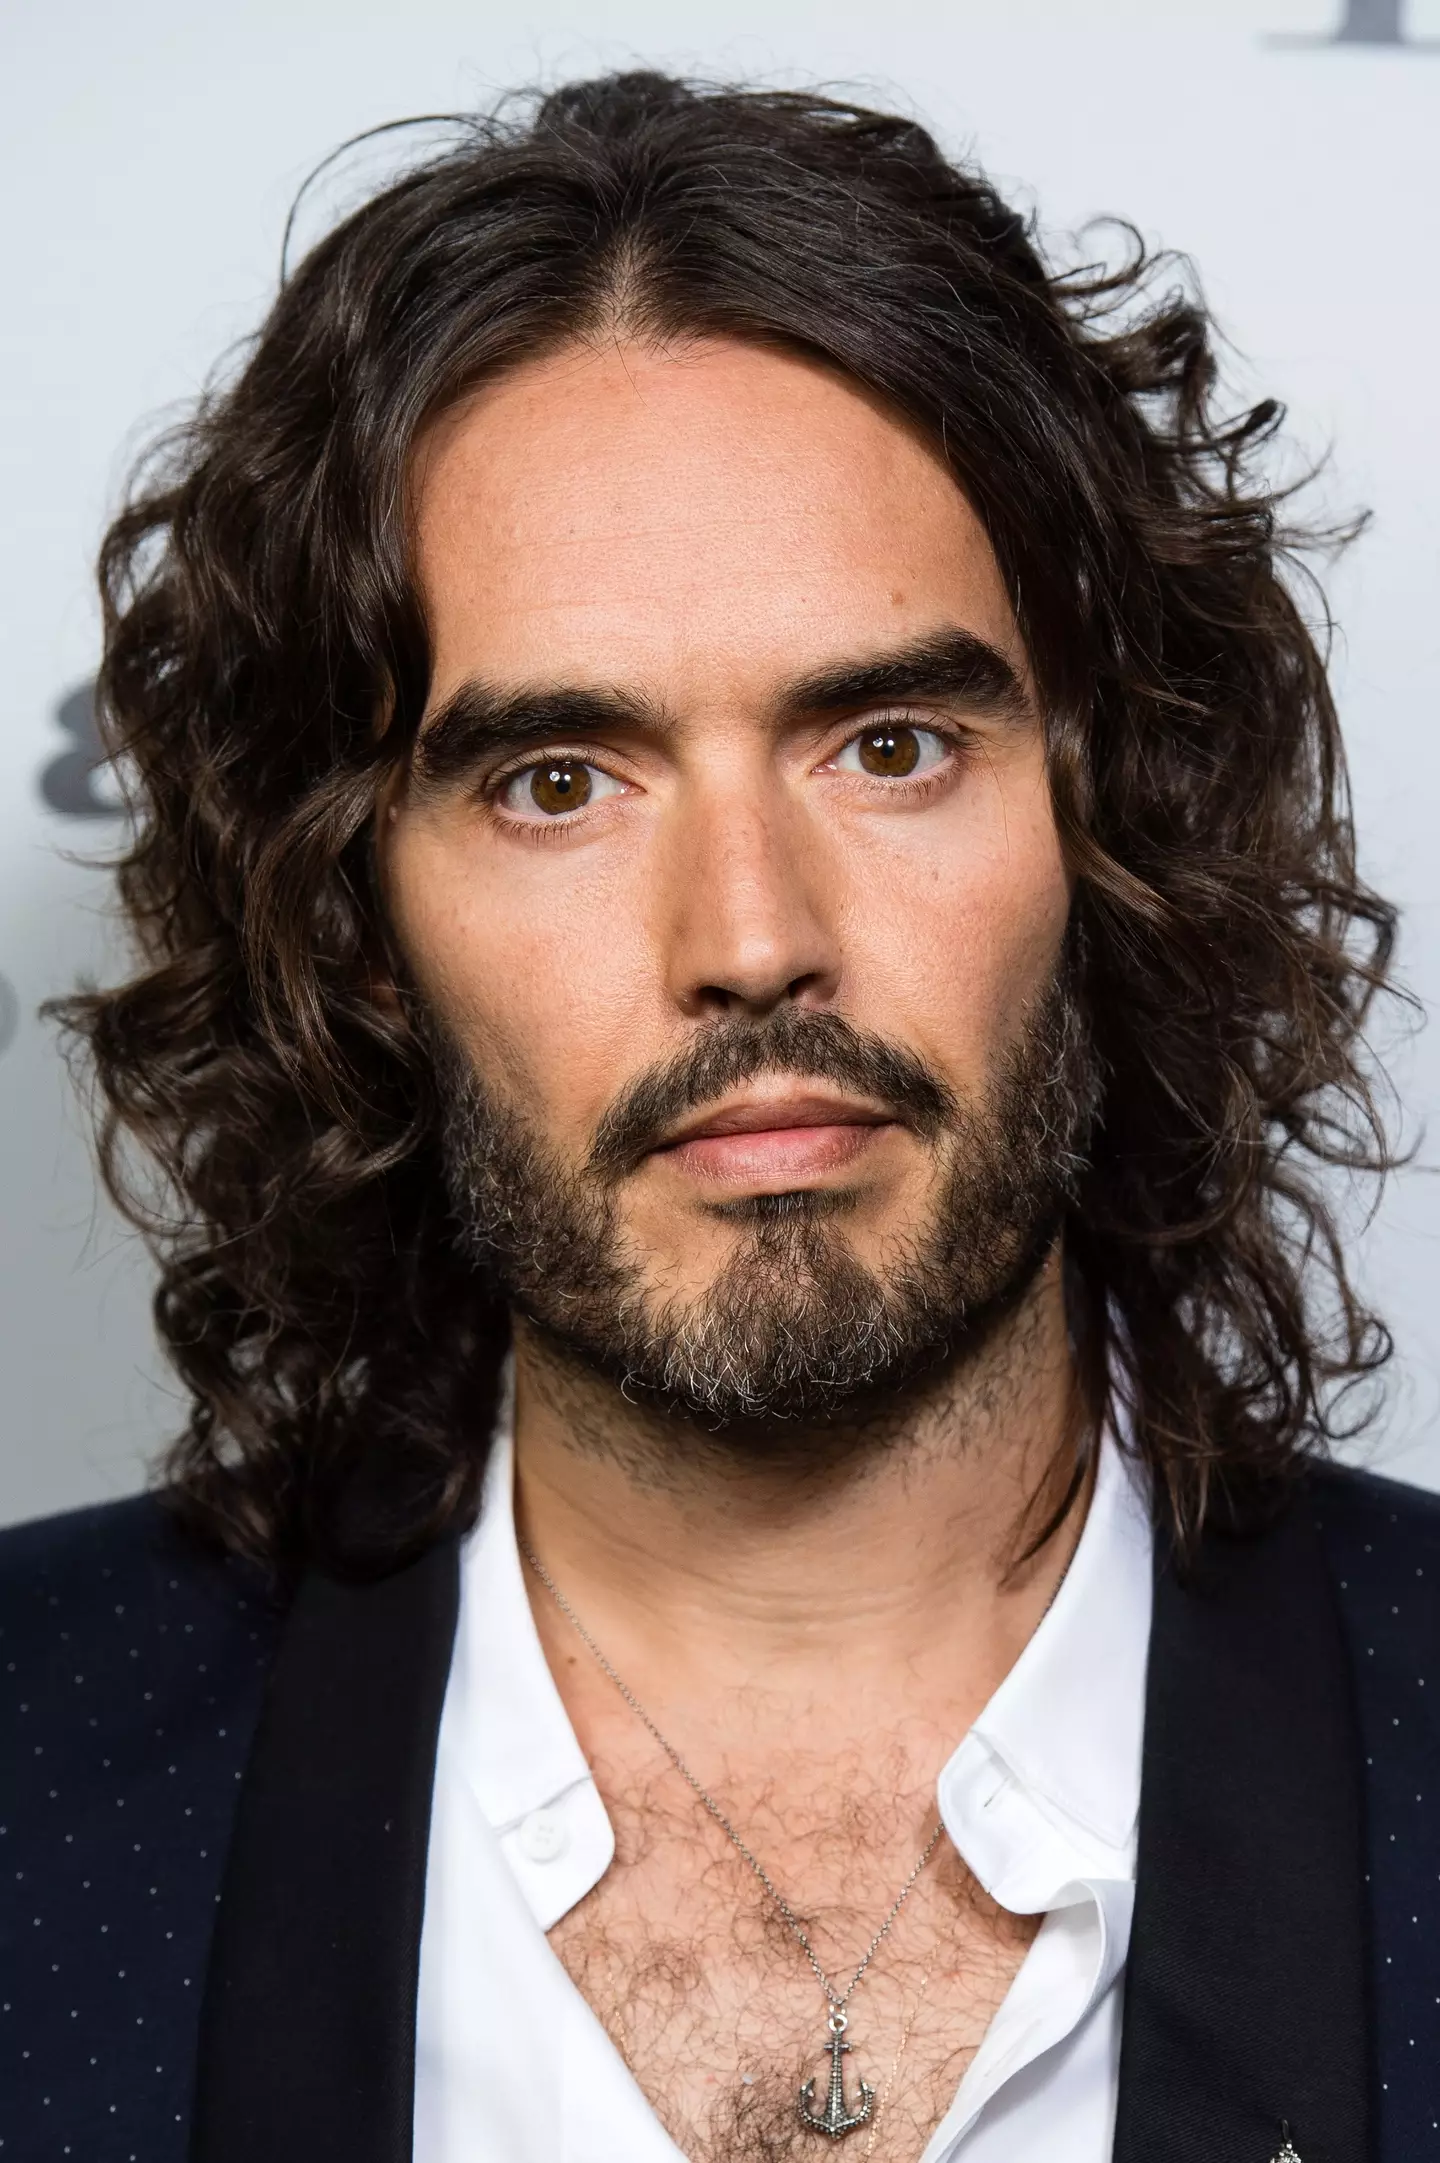 Russell Brand has been accused of rape, sexual assault and physical and emotional abuse.